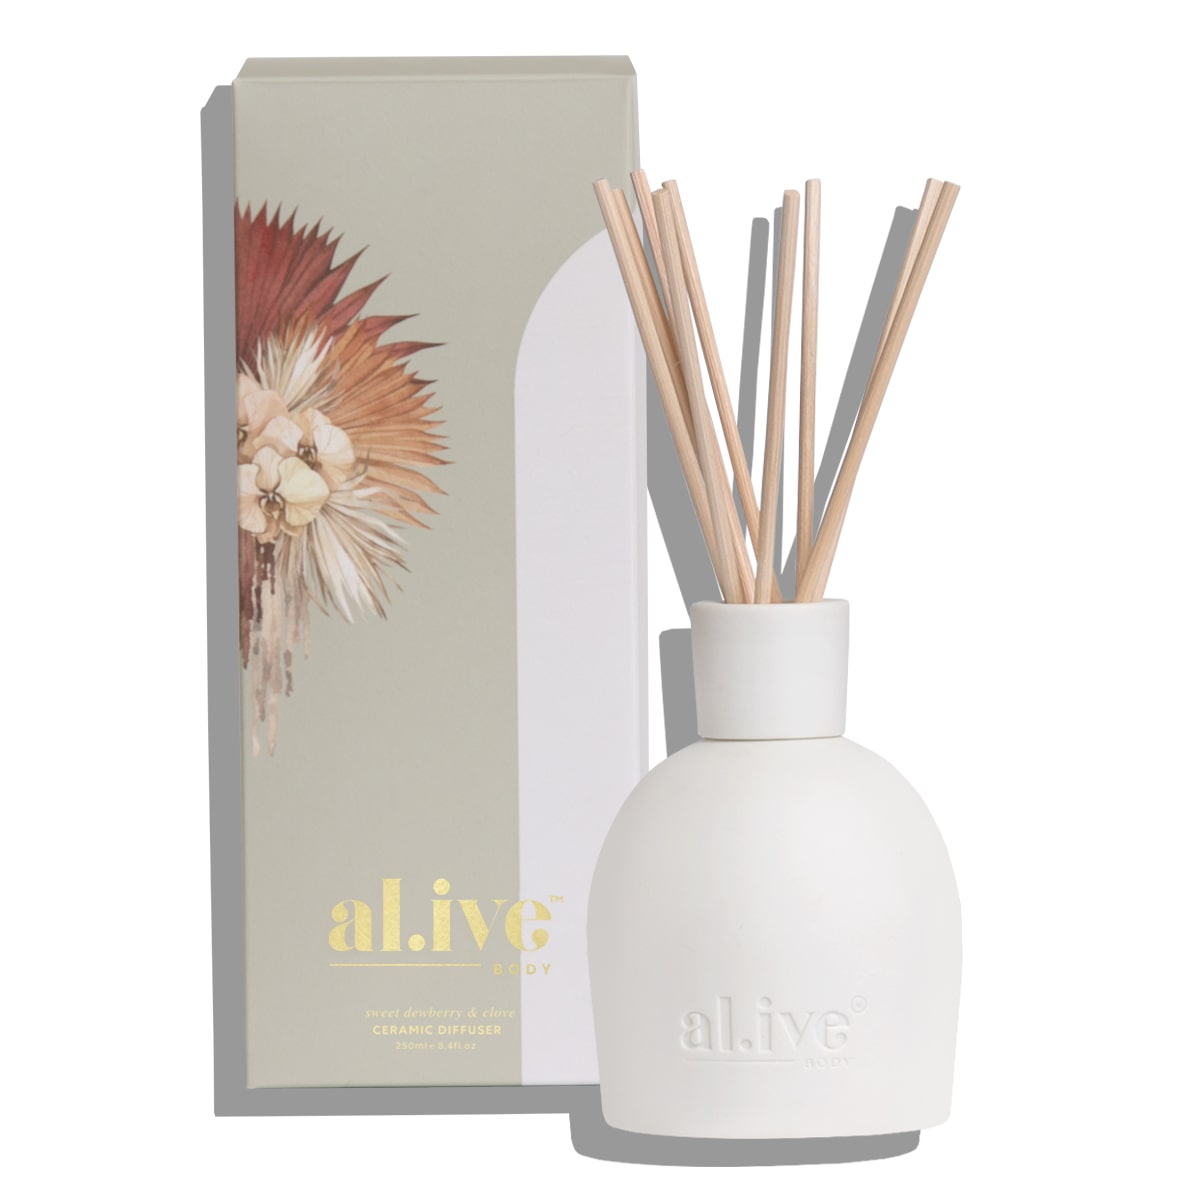 Al.ive Sweet Dewberry & Clove Reed Diffuser